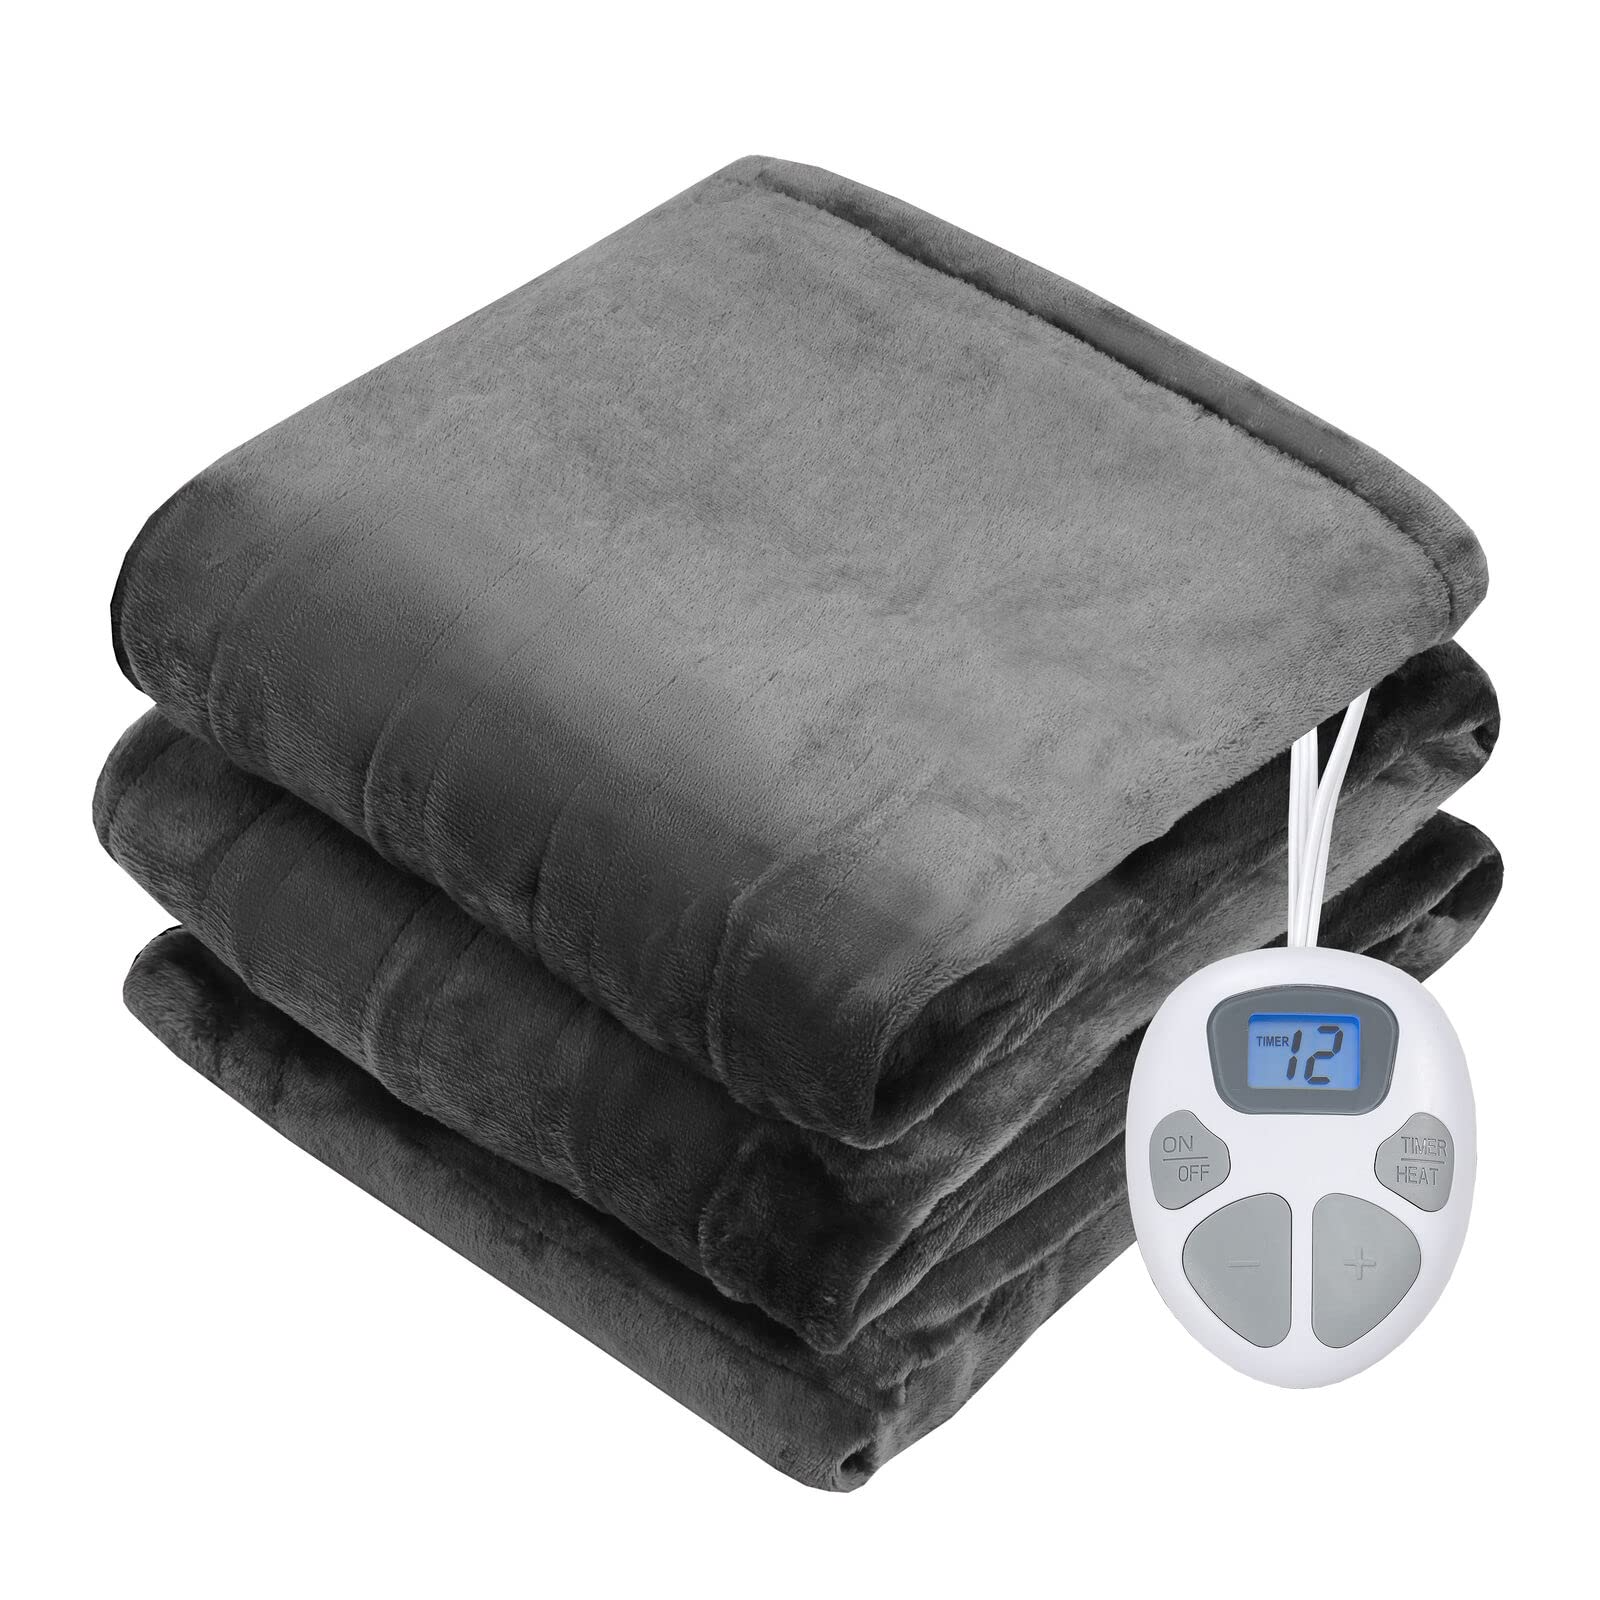 Giantex Electric Heated Blanket, Flannel Electric Blanket Throws, 10 Heating Levels, 8 Hours Auto Off